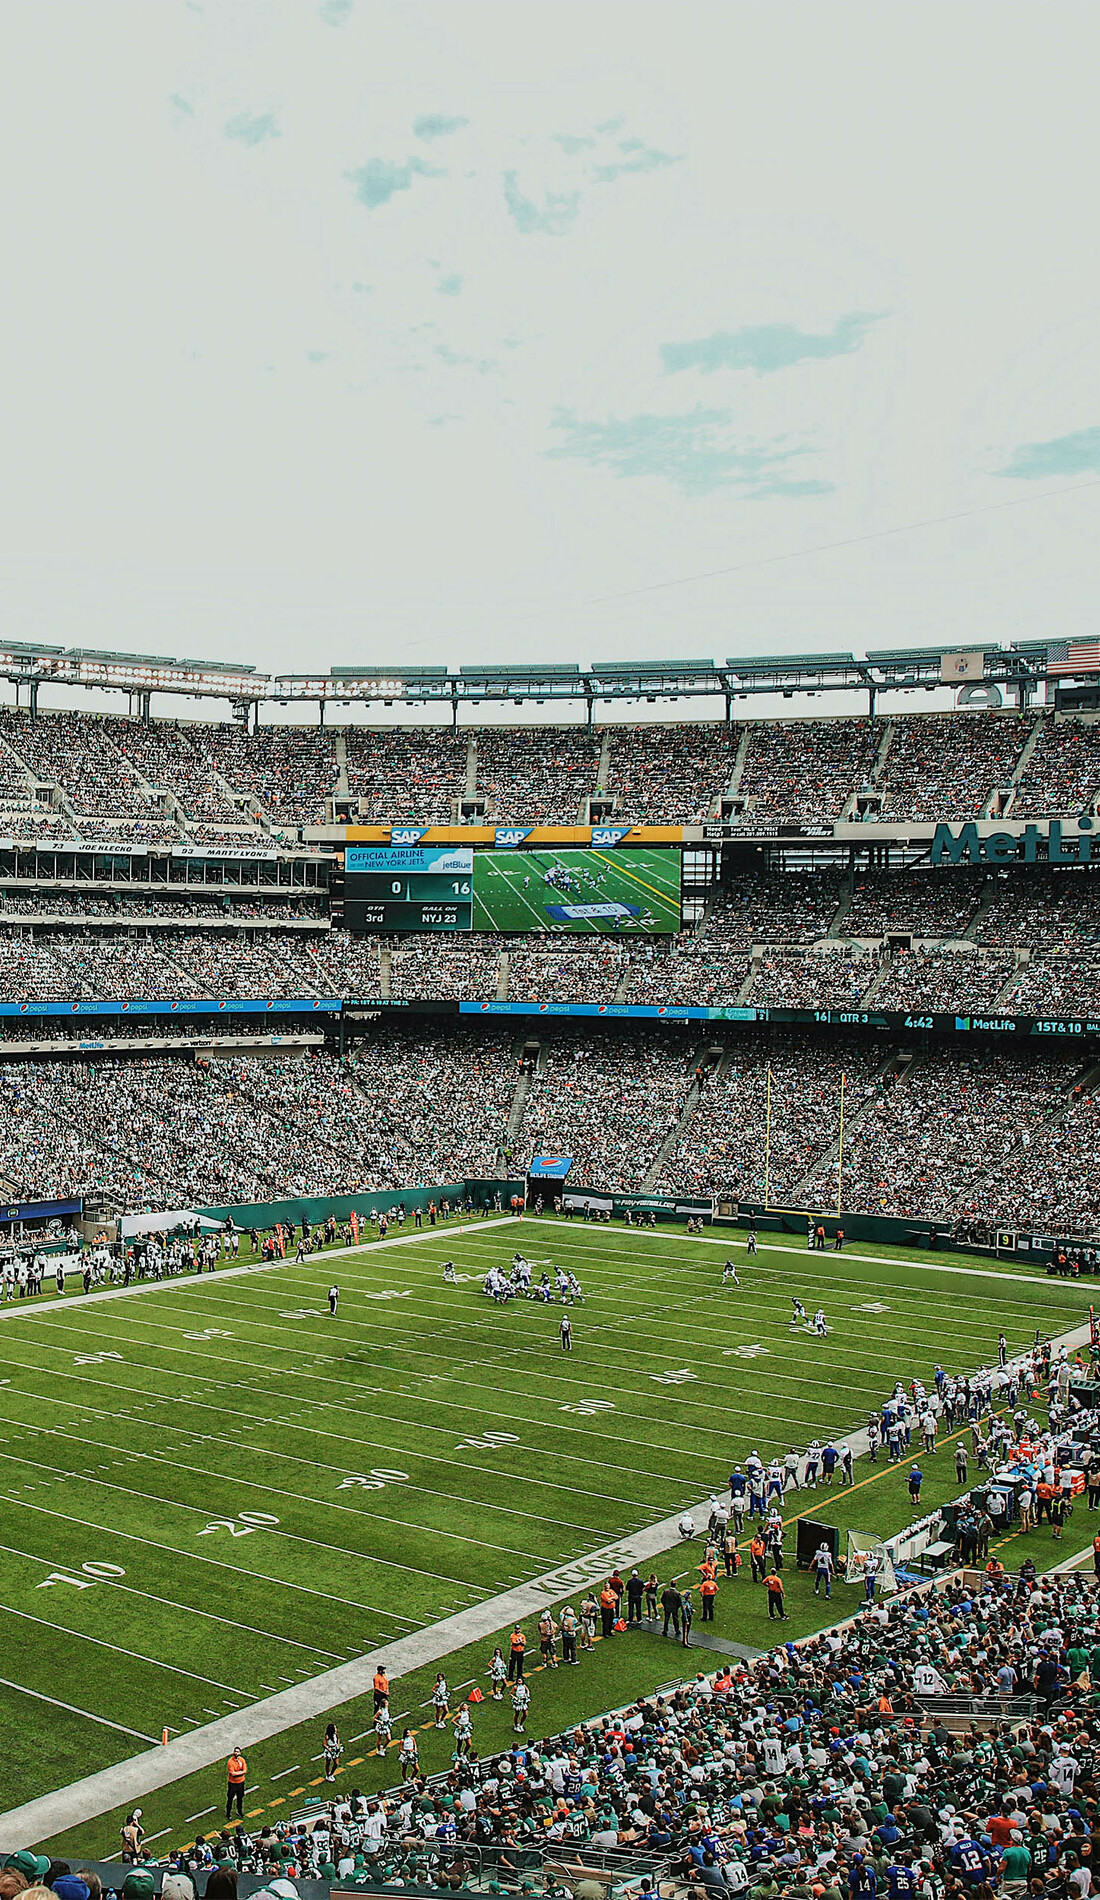 A New York Jets live event